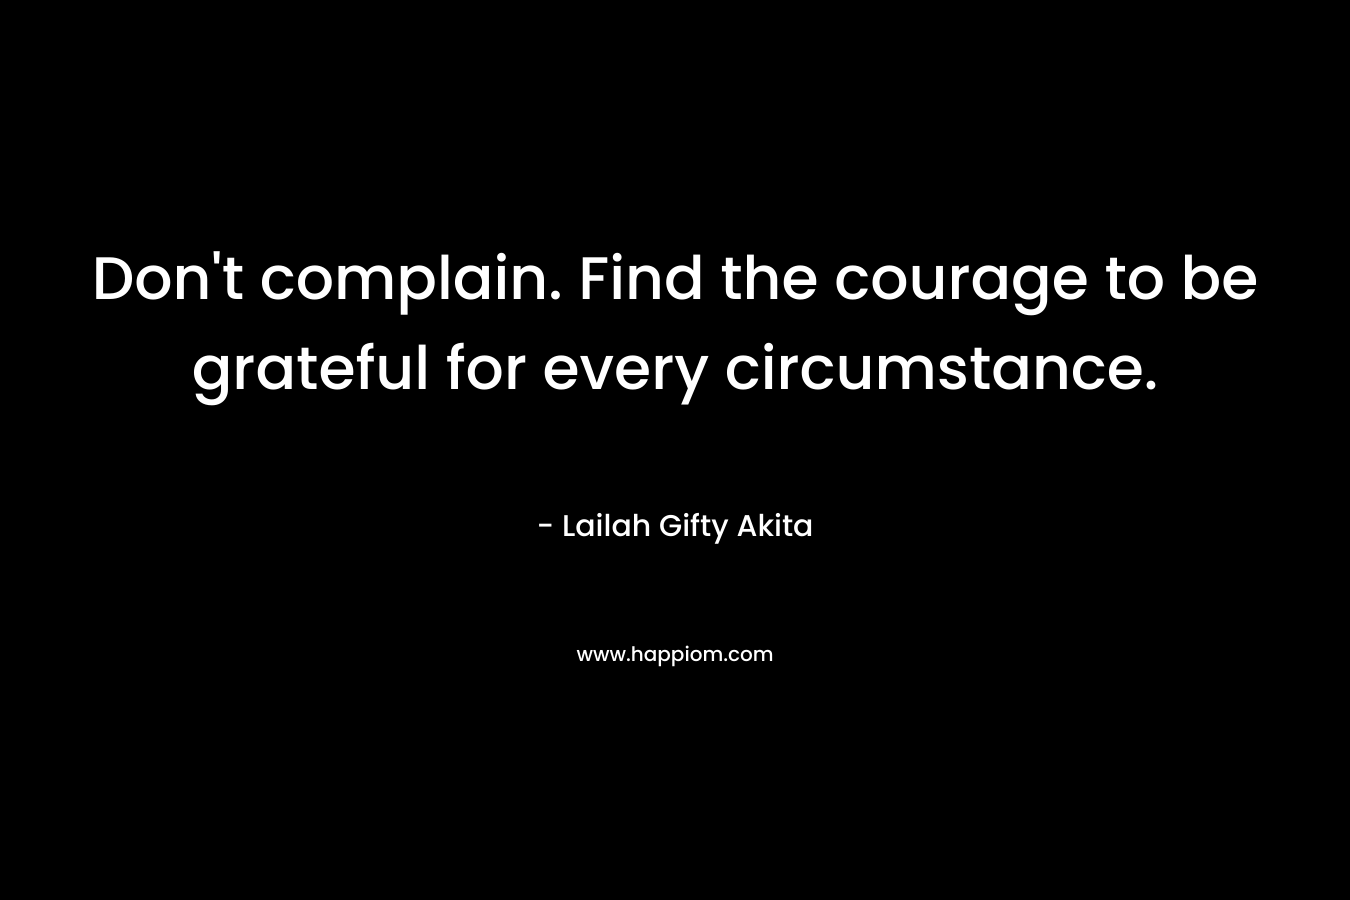 Don't complain. Find the courage to be grateful for every circumstance.